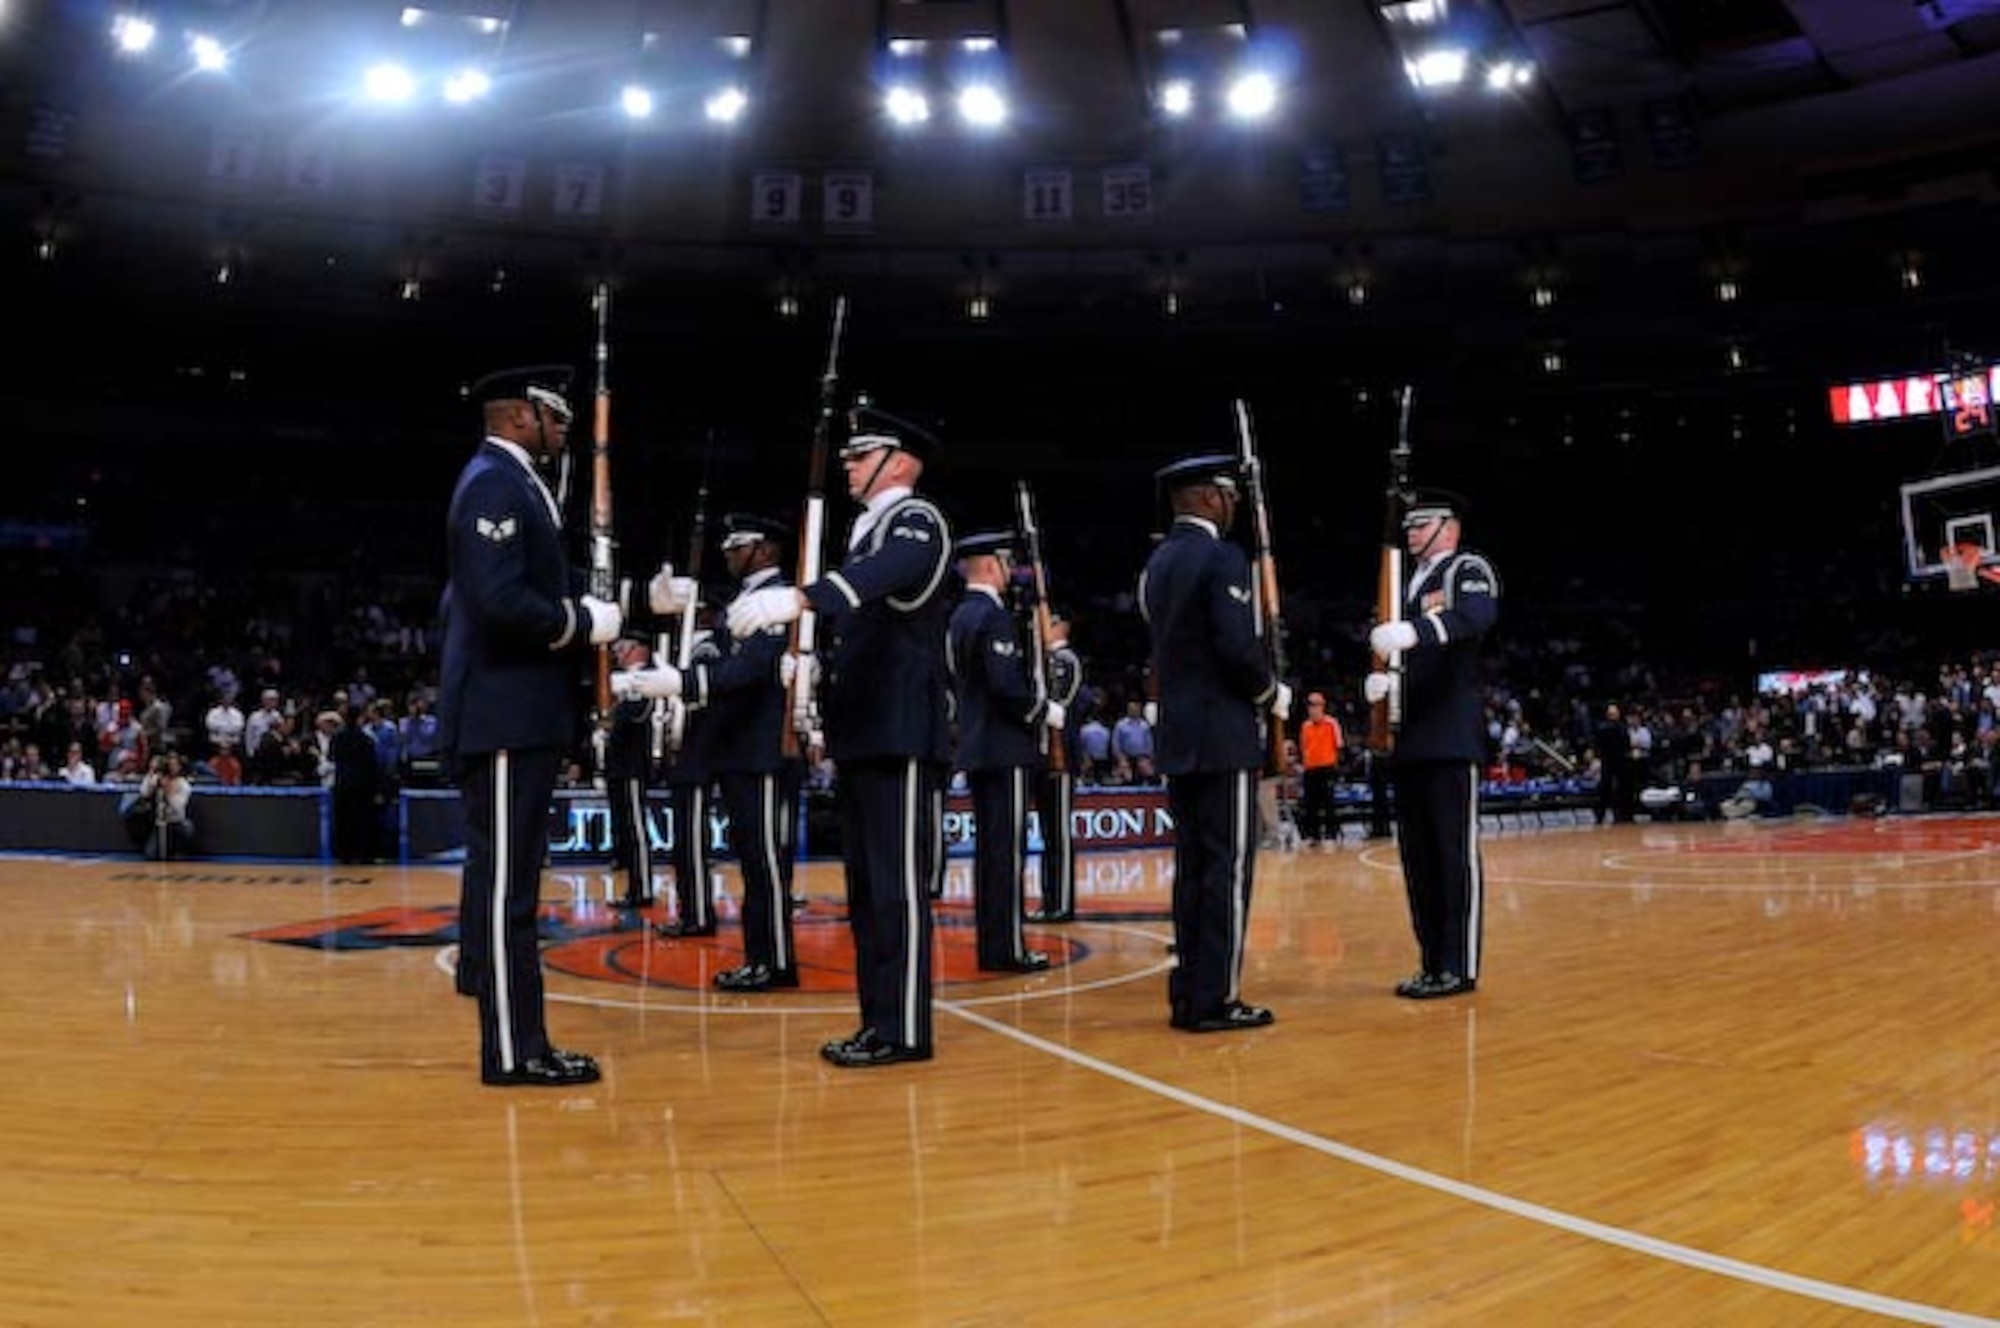 The United States Air Force Honor Guard Drill Team executes double comeback and double spins during their performance at the New York Knick’s halftime show during Military Appreciation Night at New York’s Madison Square Garden Nov. 11.  The Drill Team is the traveling component of the U.S. Air Force Honor Guard and tours worldwide representing all Airmen while showcasing Air Force precision and professionalism. (U.S. Air Force photo by Senior Airman Marleah Miller)